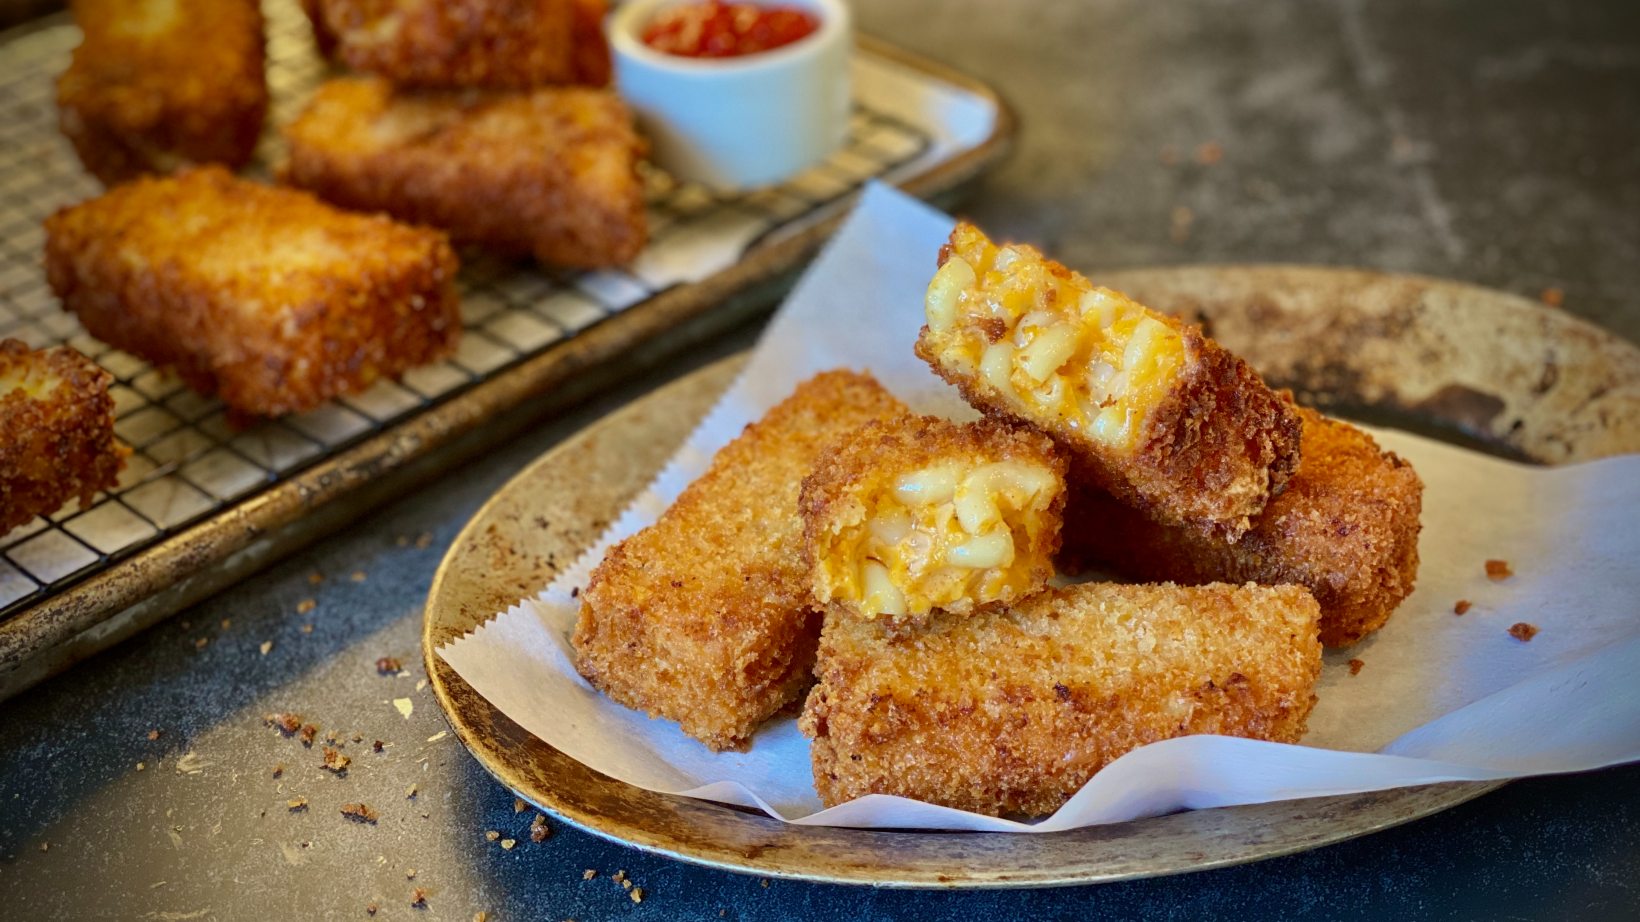 Fried mac and cheese sticks on a paper towel-lined plate.